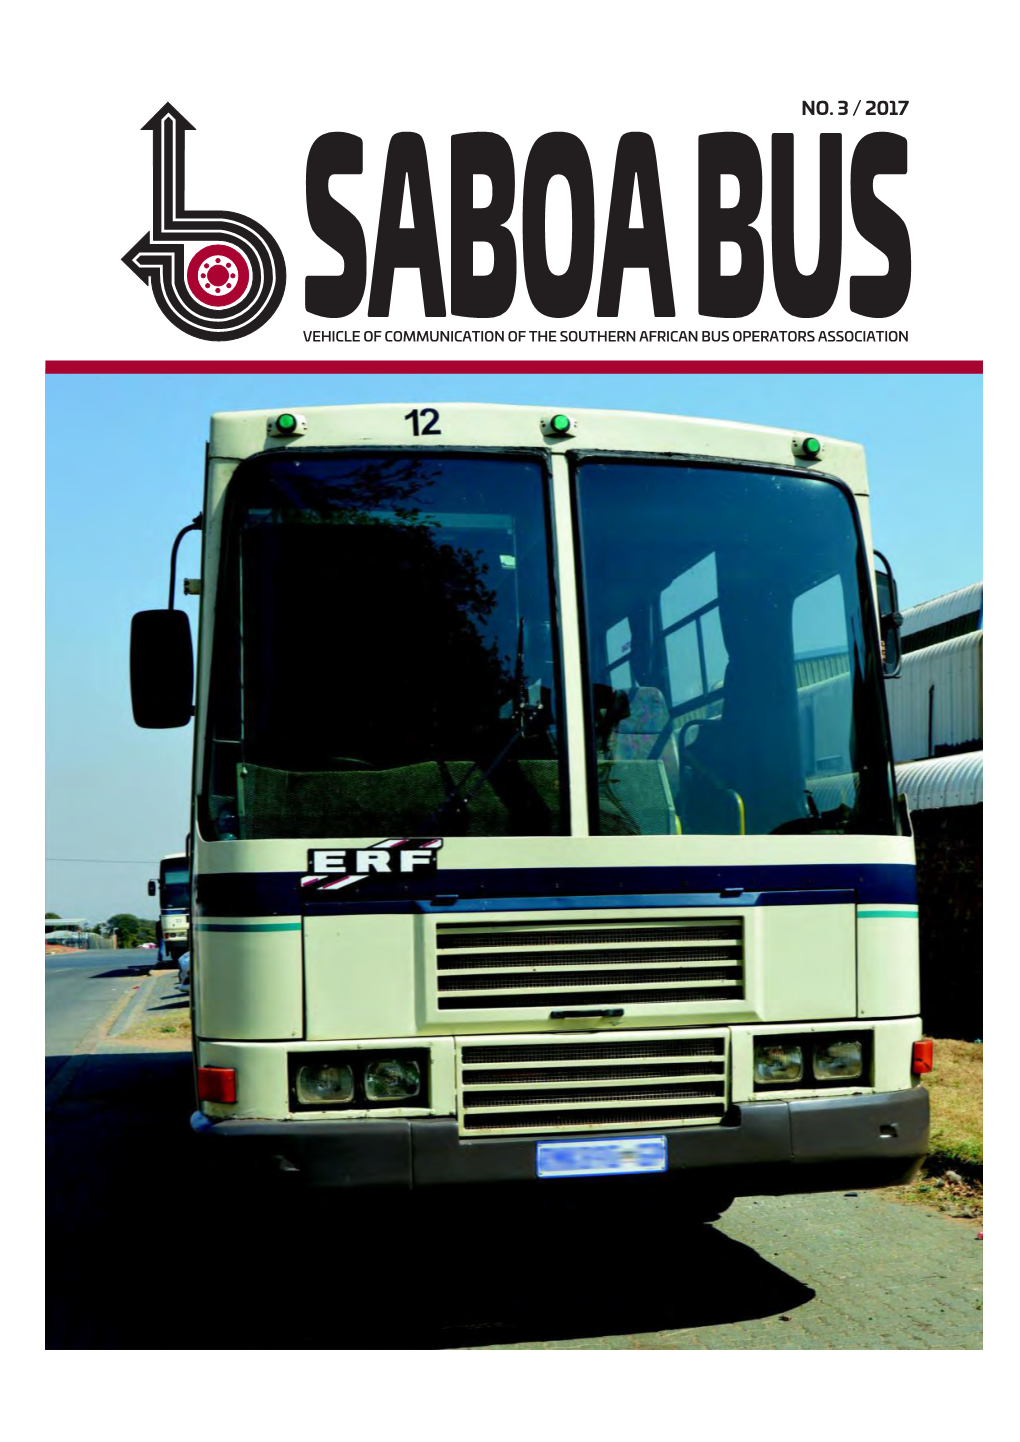 No. 3 / 2017 Vehicle of Communication of the Southern African Bus Operators Association